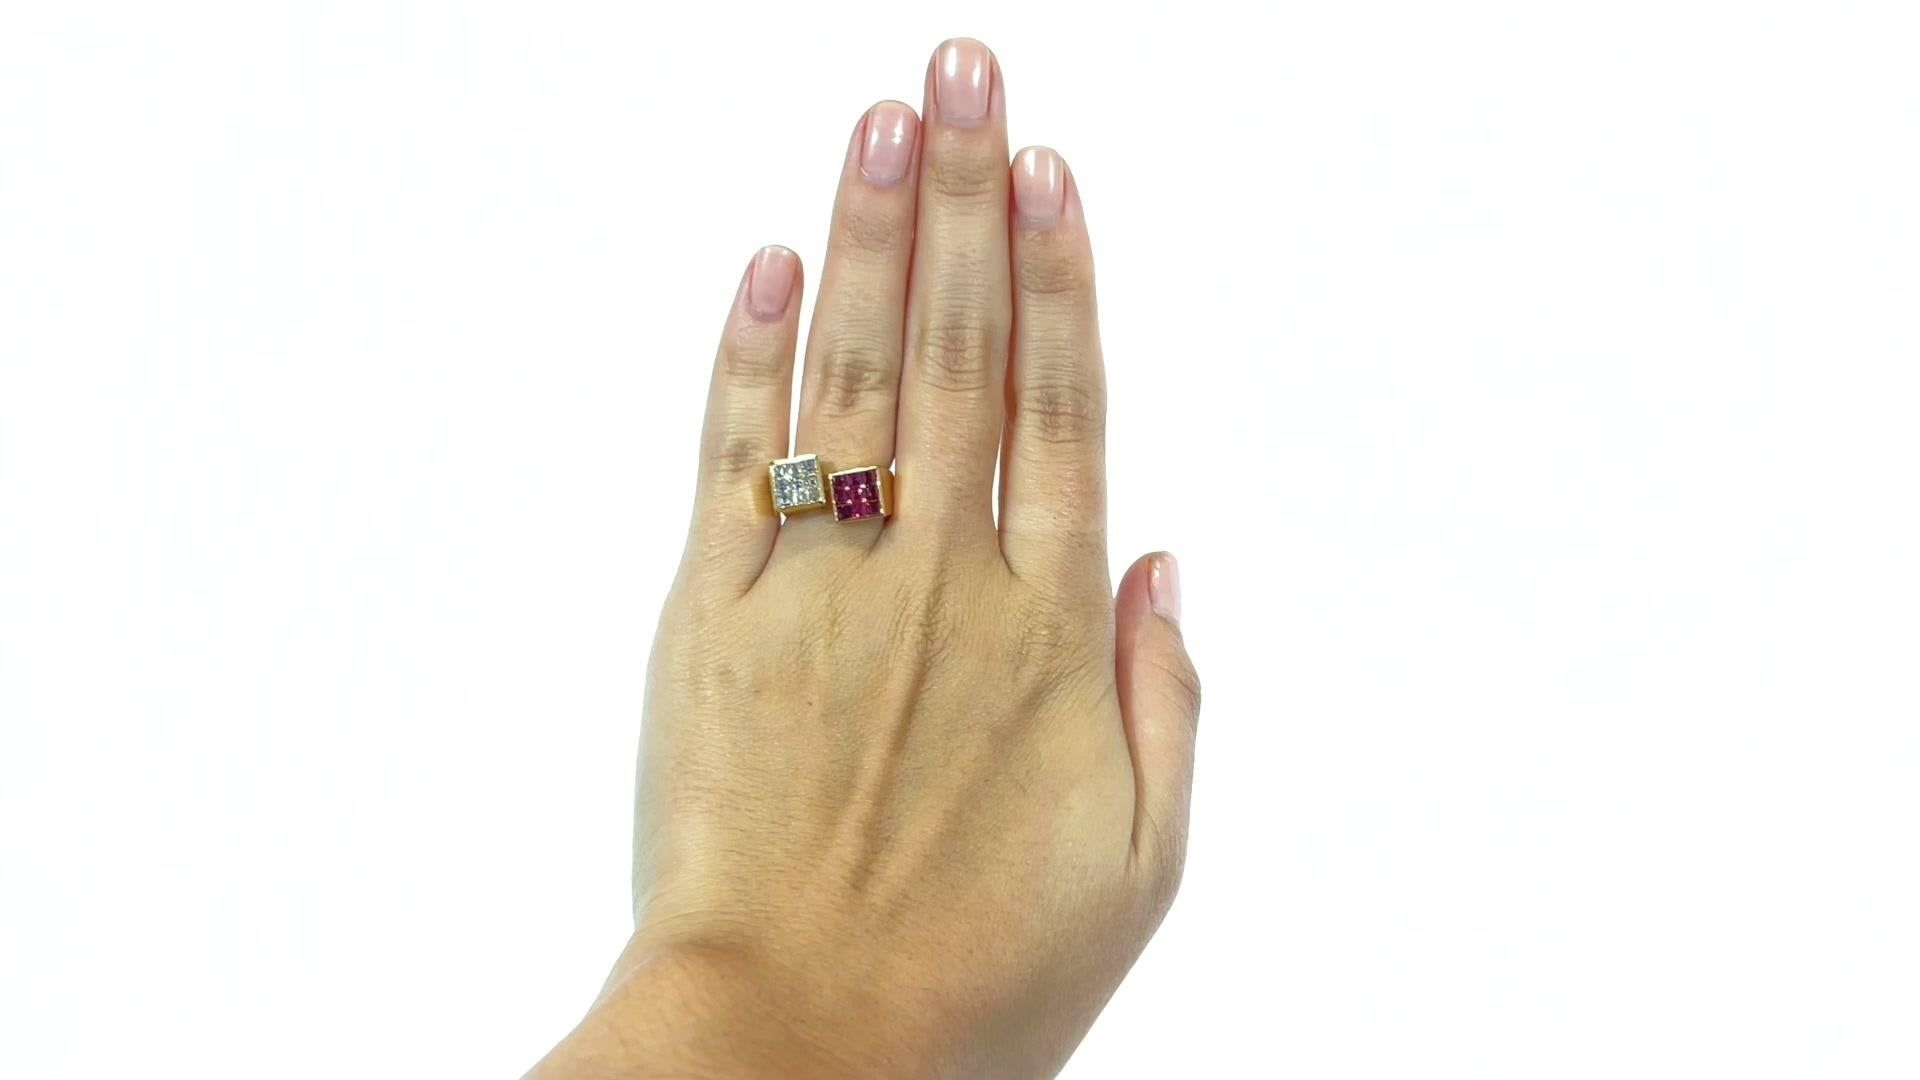 Vintage Ruby Diamond 18 Karat Gold Bypass Ring. Featuring 9 square cut rubies approximately  1.80 carats as well as  9 square emerald cut diamonds approximately 1 carat  F-G color, VS-SI clarity. Circa 2000s.

About the piece: A good looking vibrant